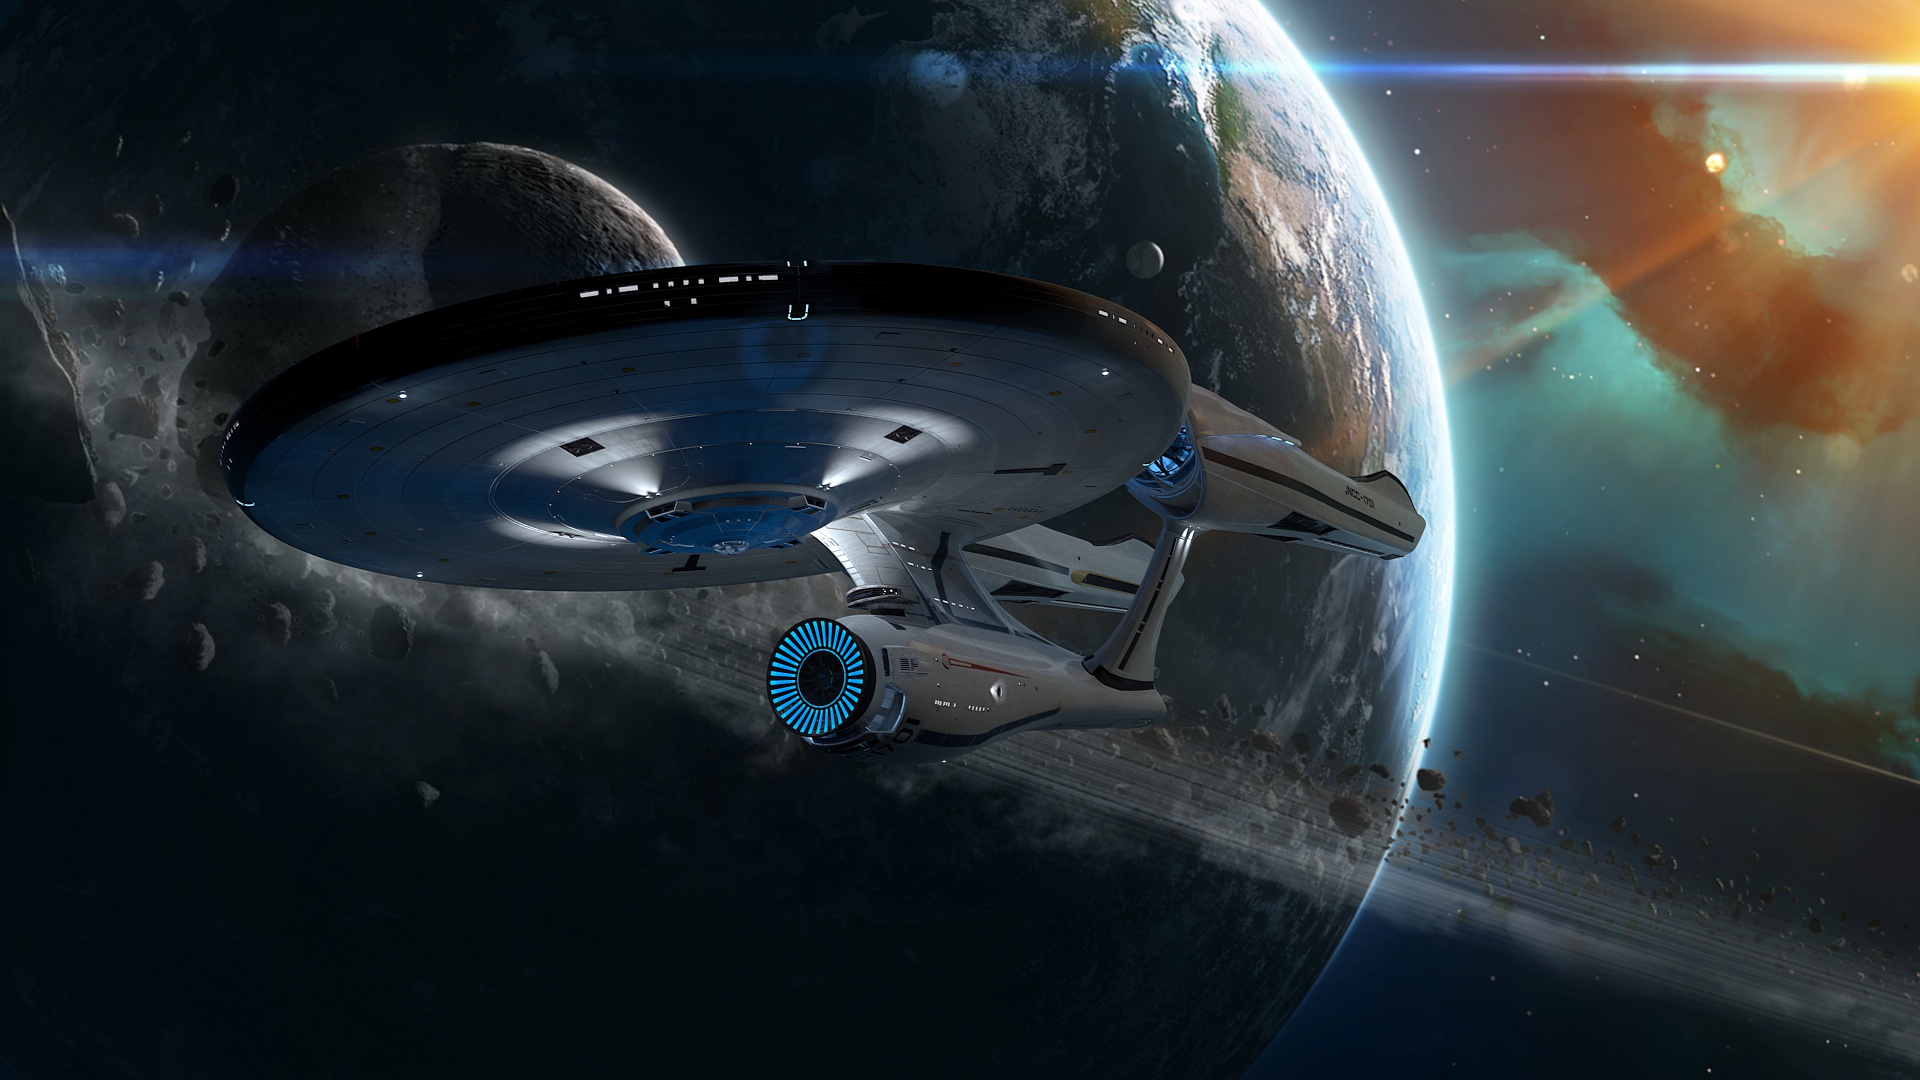 Enterprise Ncc Leaving Orbit By The Didact